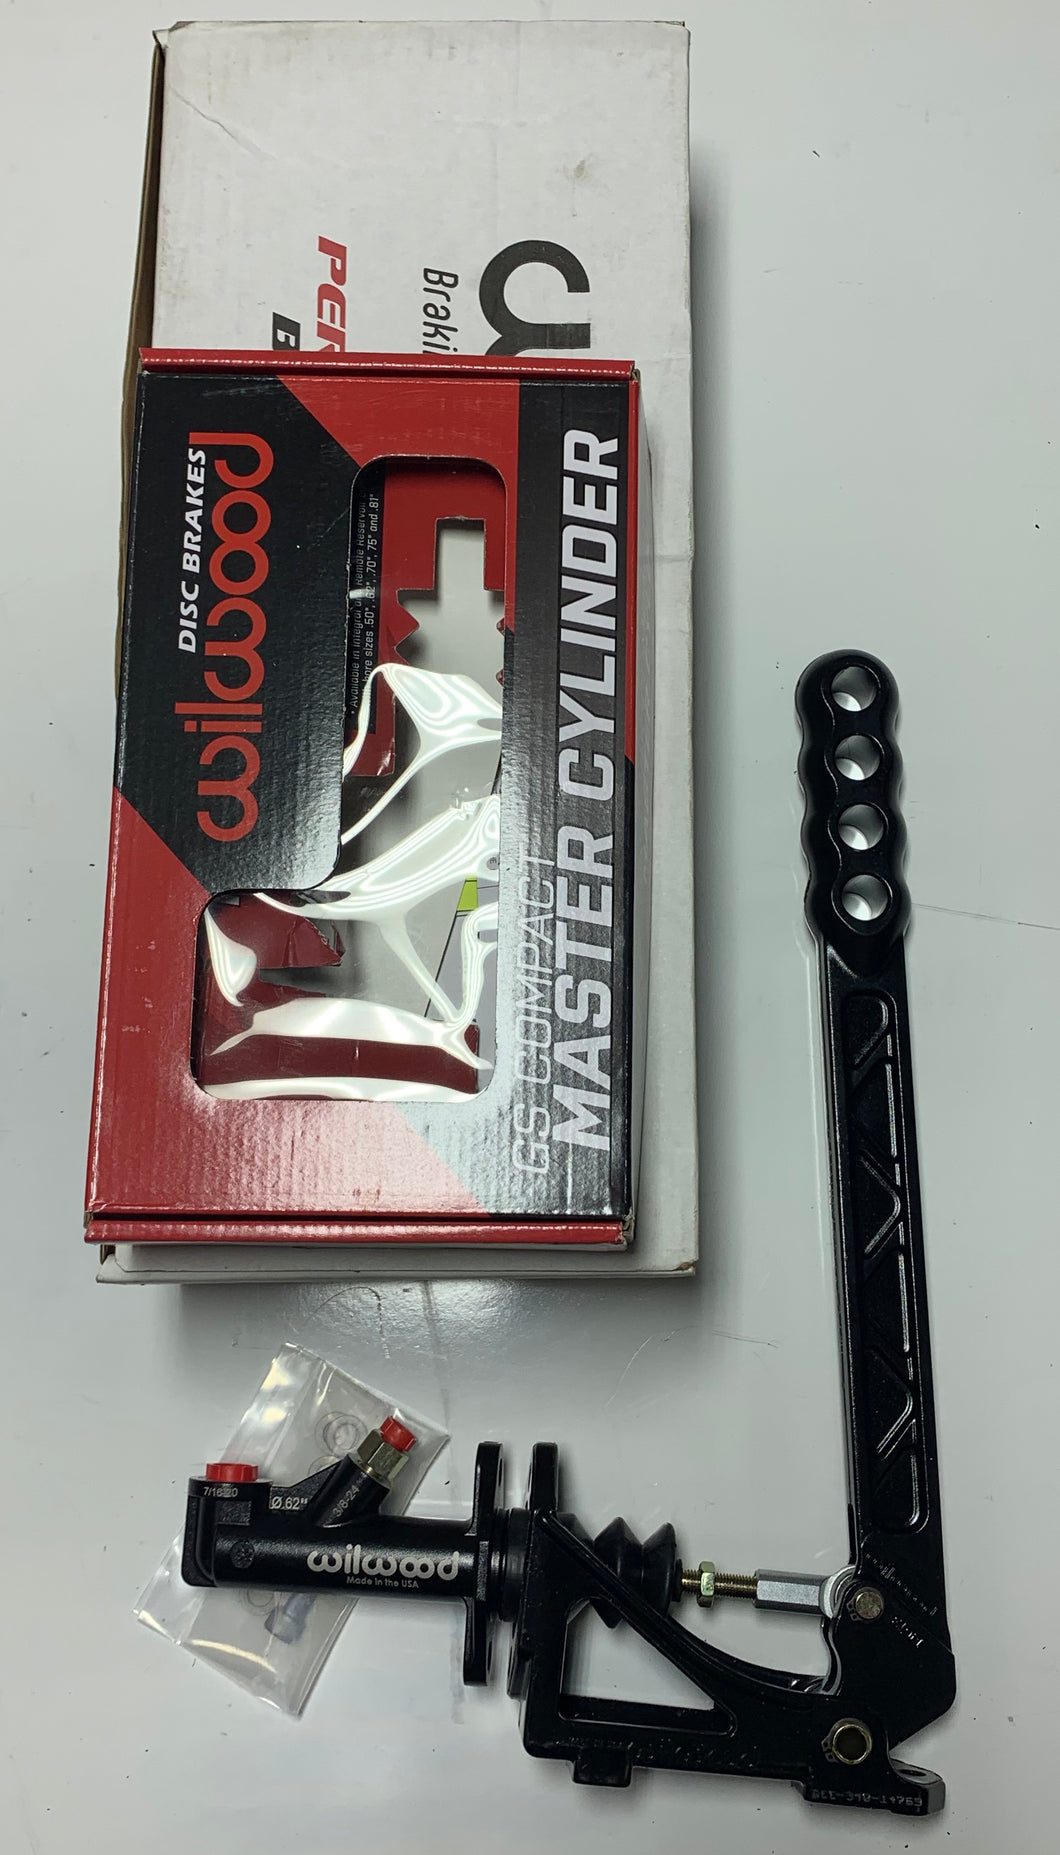 Wilwood Hydraulic Hand Brake And Master Cylinder Assemblies